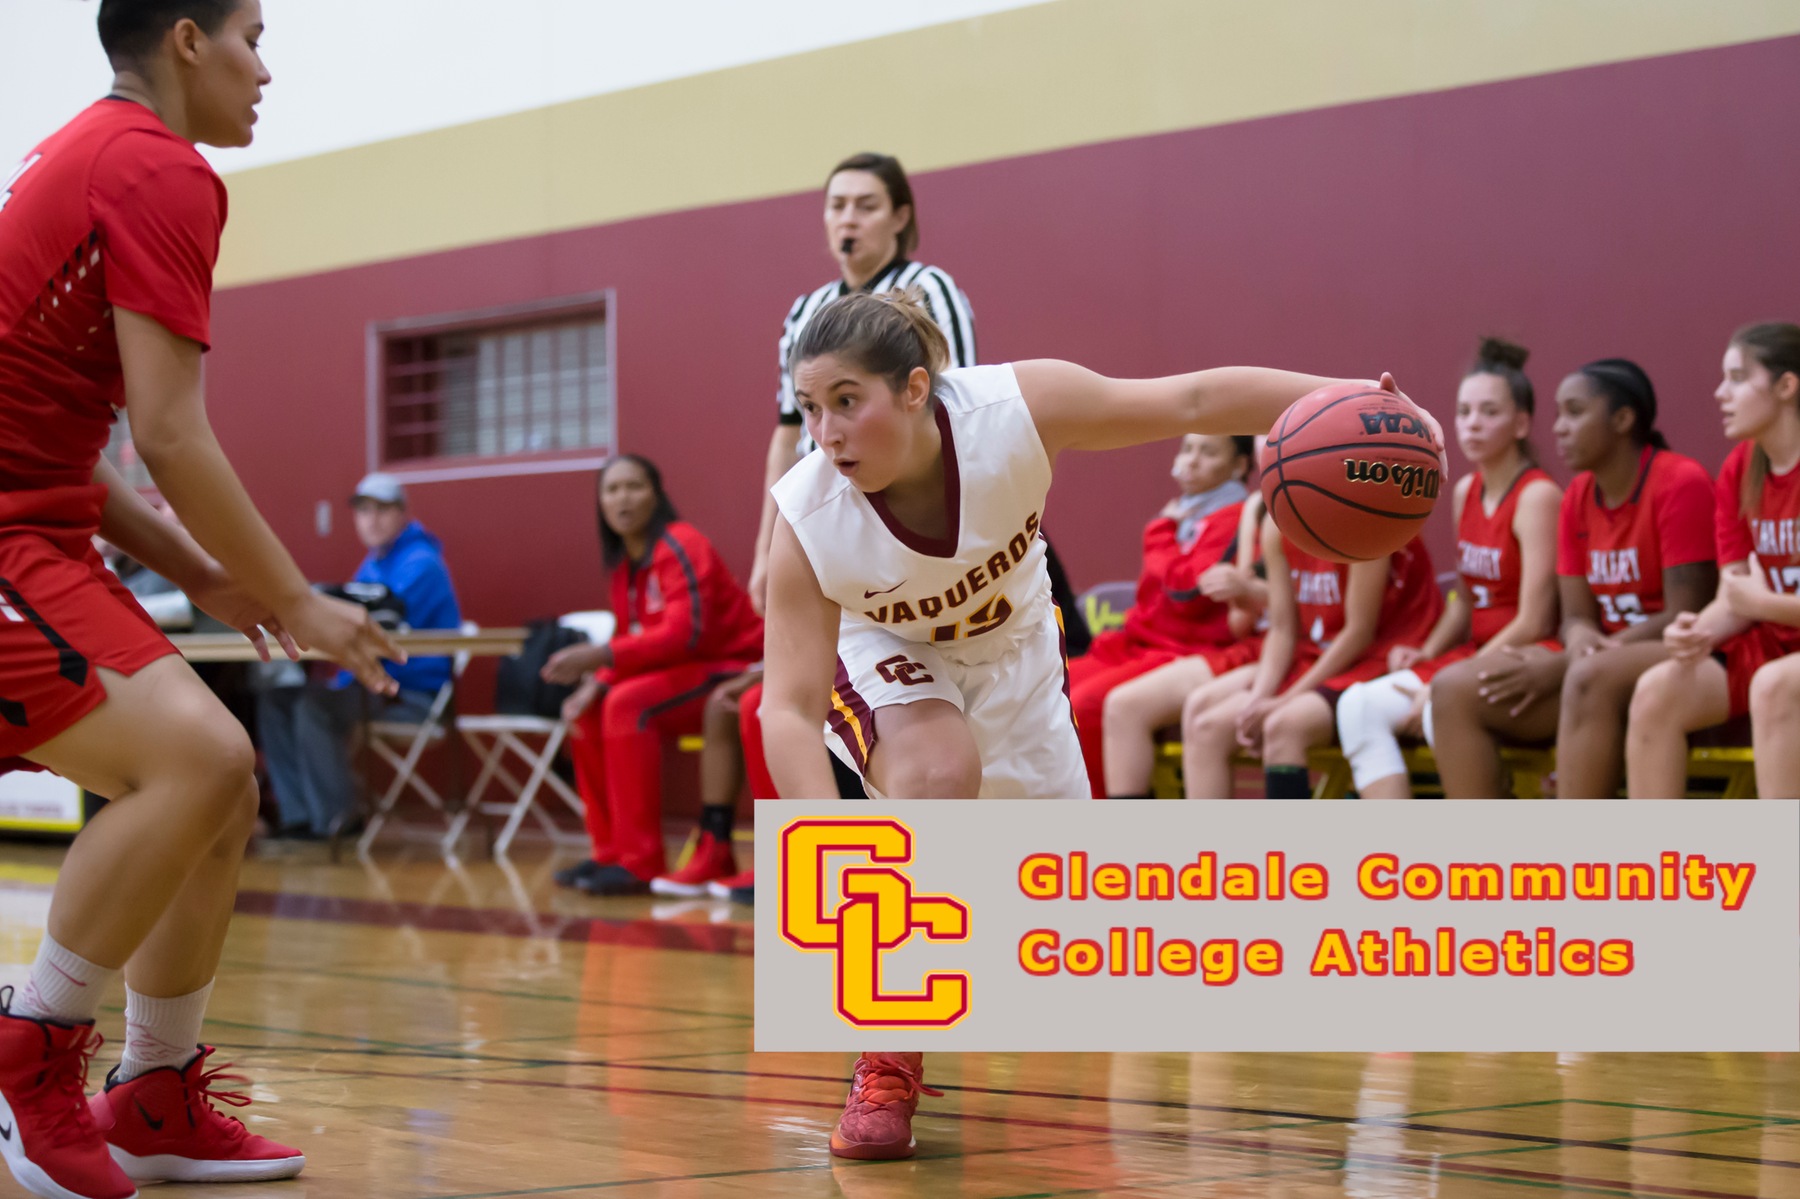 GCC Women’s Basketball improves to 4-1 with a pair of wins